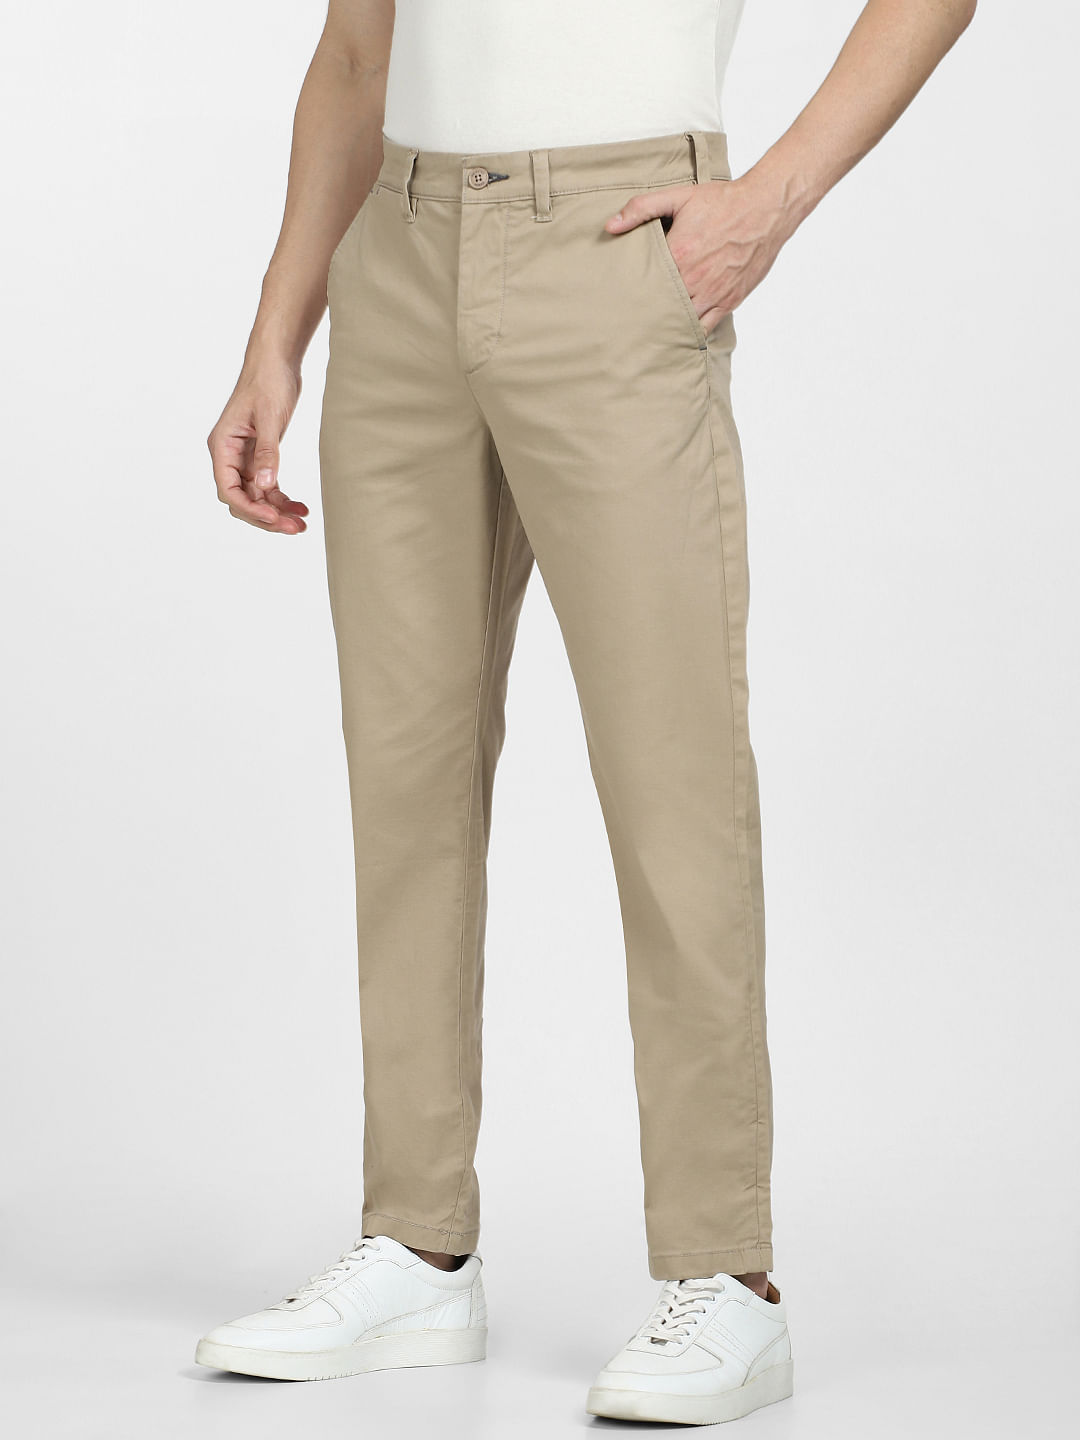 Buy Slim Fit Chinos with Insert Pockets Online at Best Prices in India   JioMart